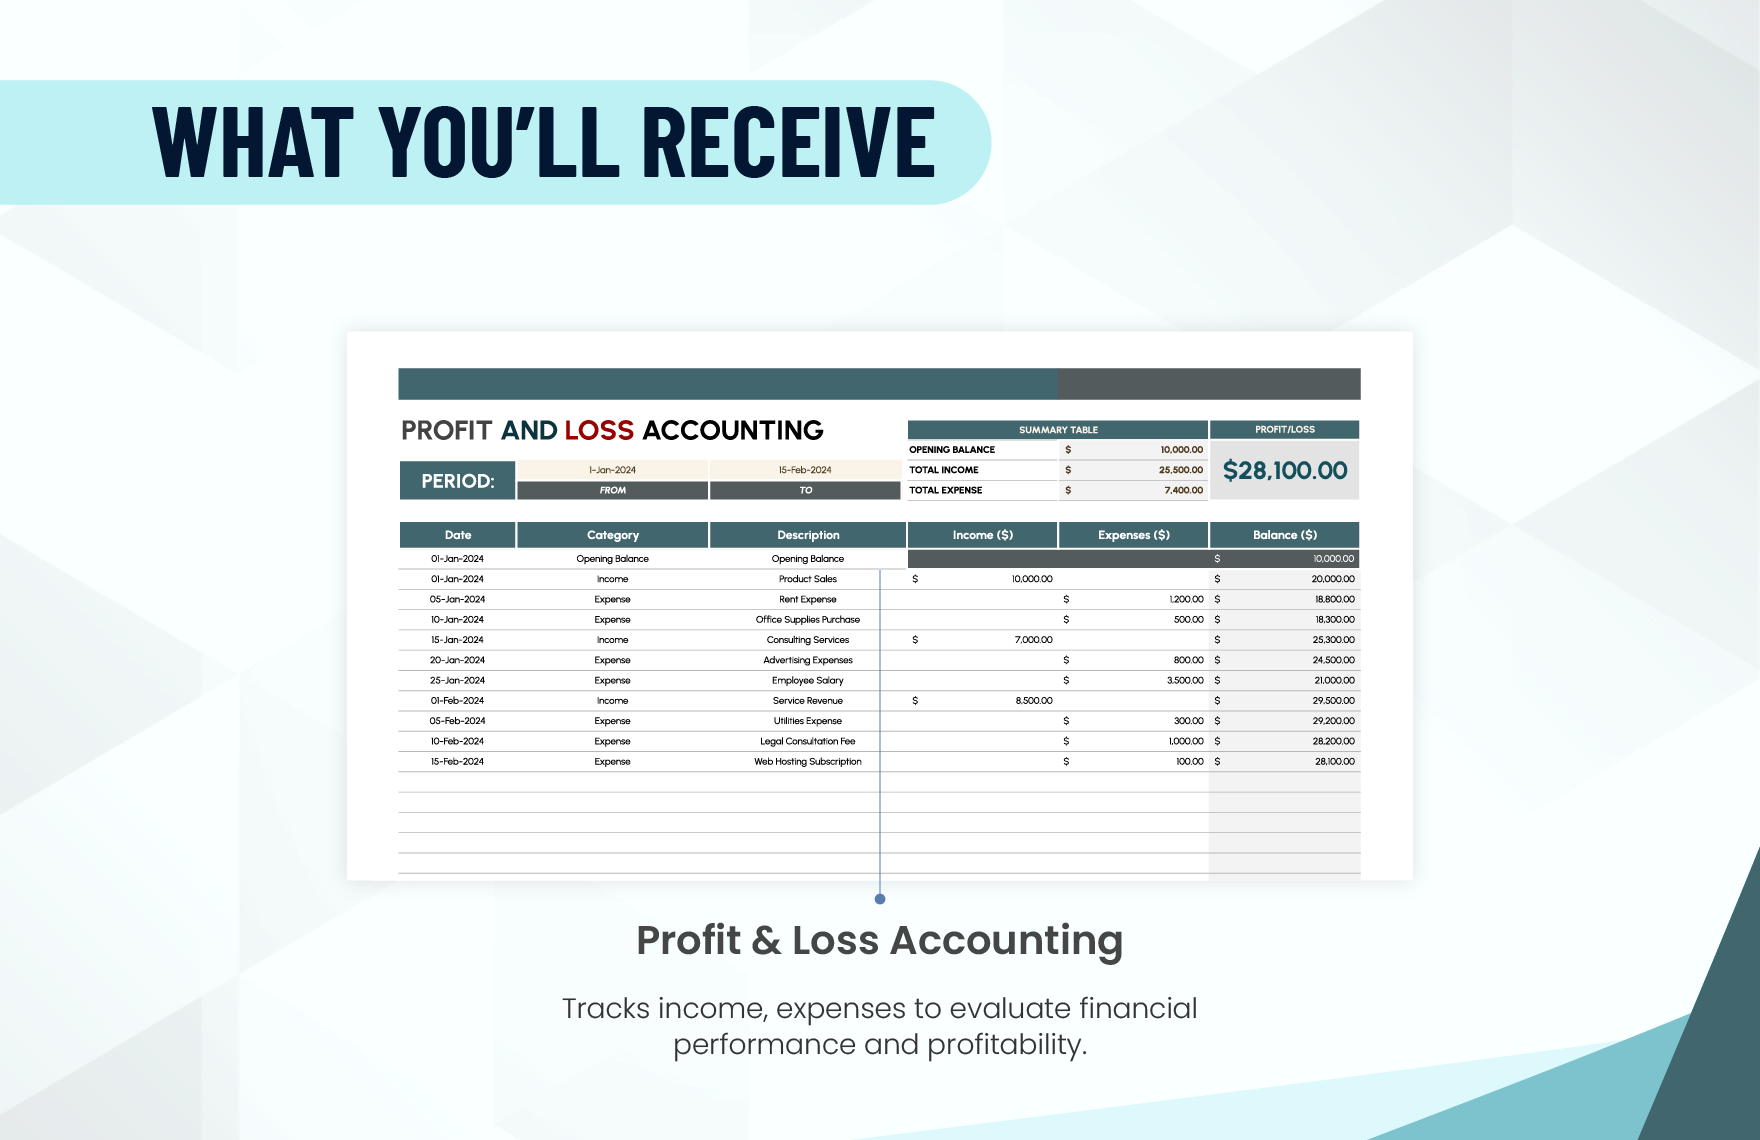 Profit and Loss Accounting Template